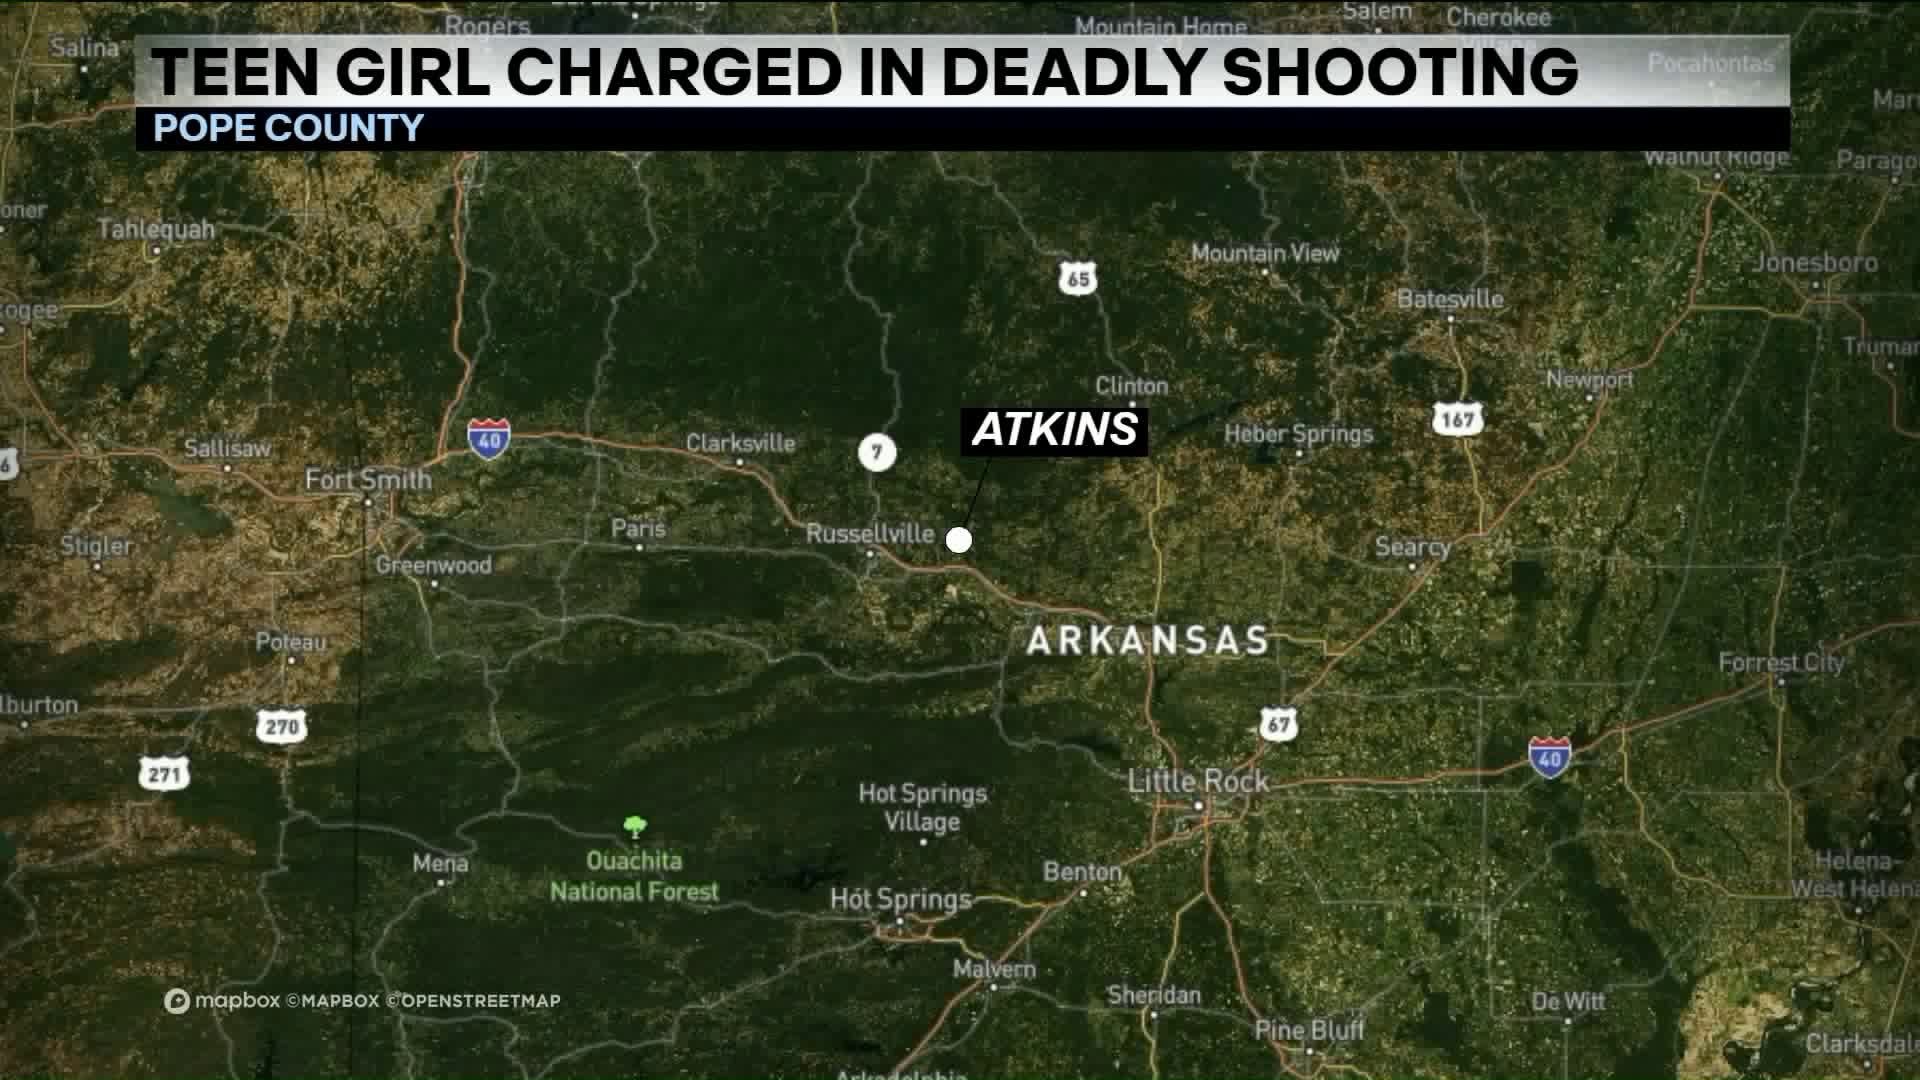 Teen Girl Charged in Death of Pope County Man